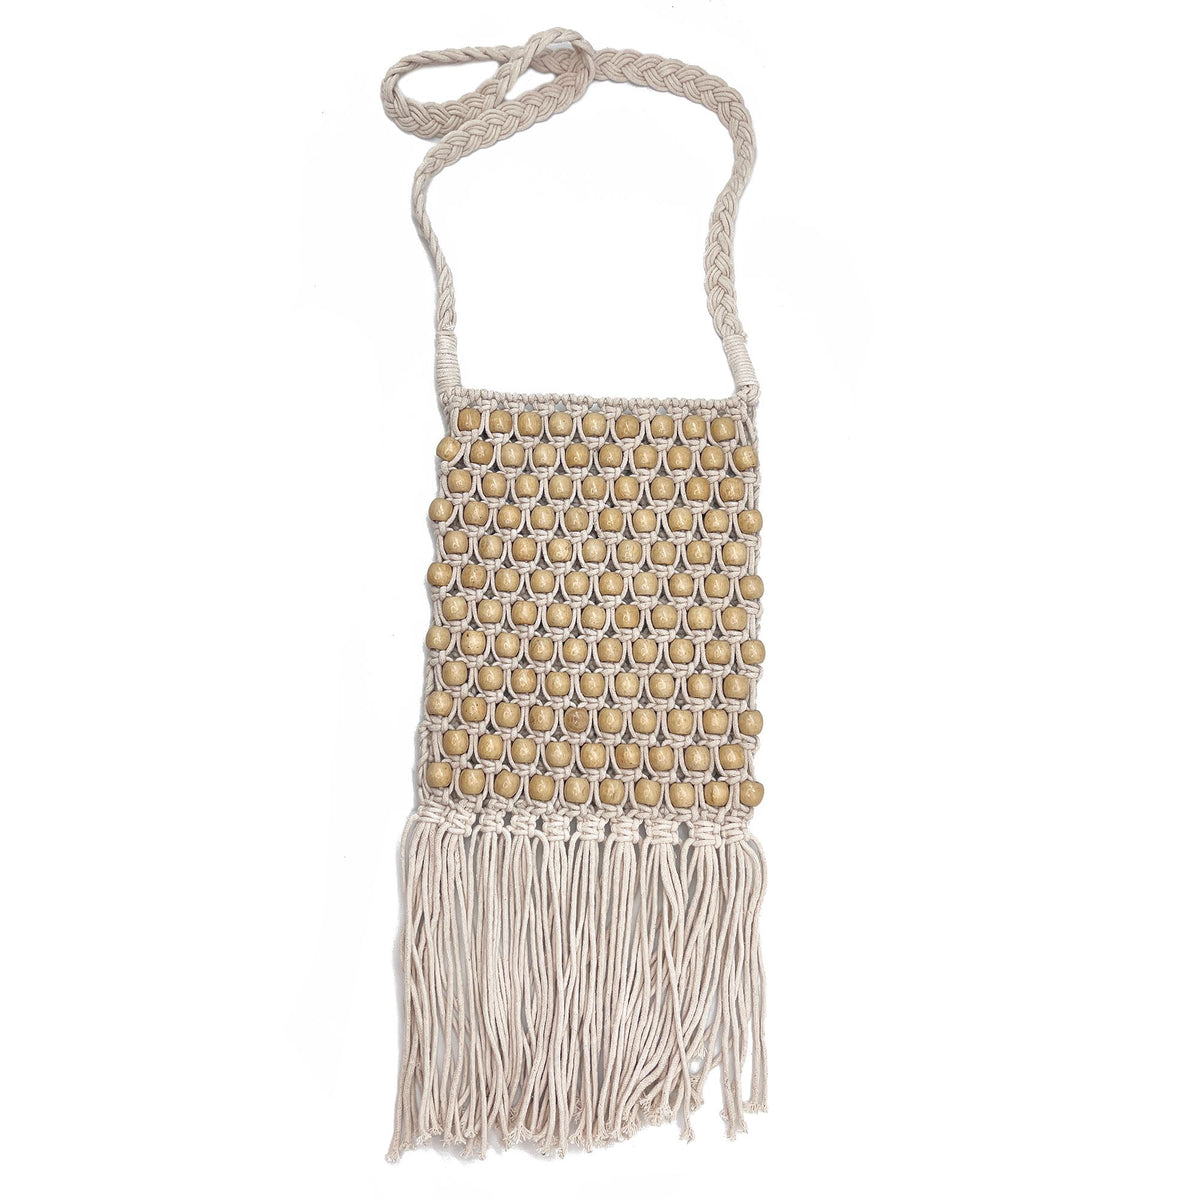 Coco Macrame Sling Bag with Wood Beads